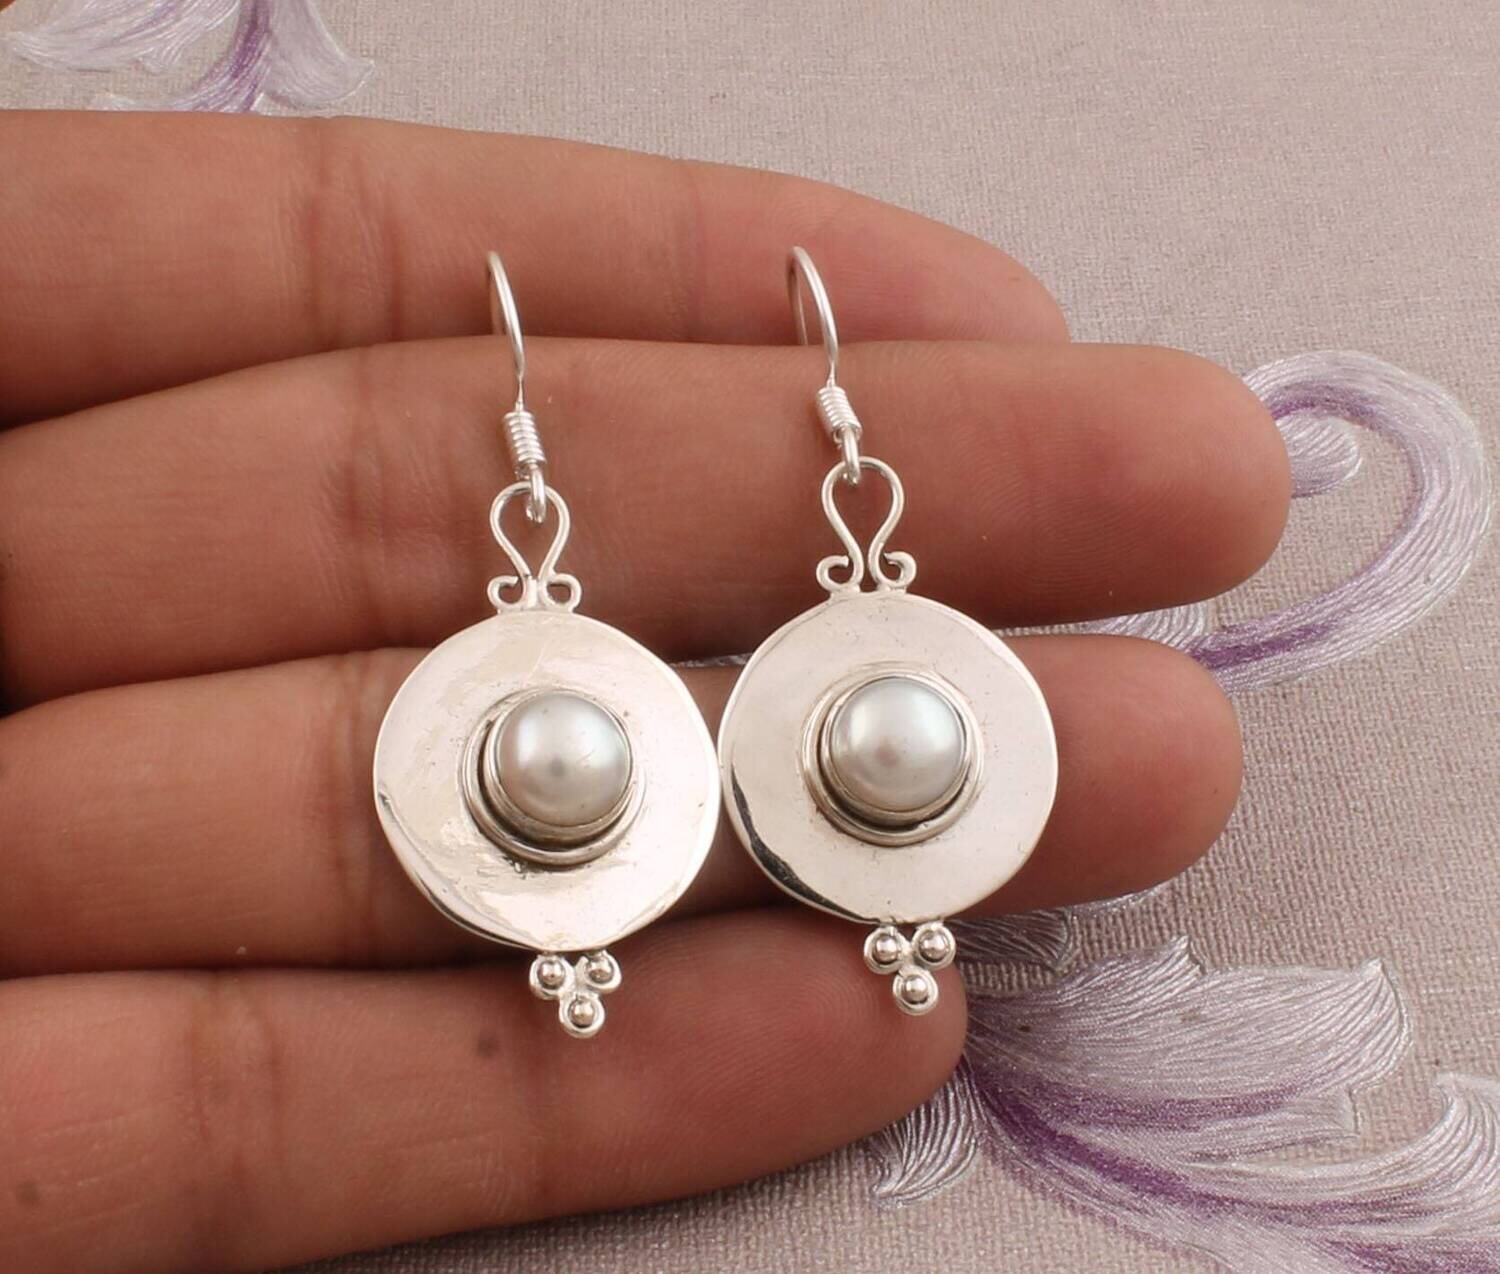 Natural Pearl Gemstone Earring,Top Quality Cabochon Opaque Earring 925,Antique Silver Earring,Sterling Silver Earring,Valentine's Day Gift